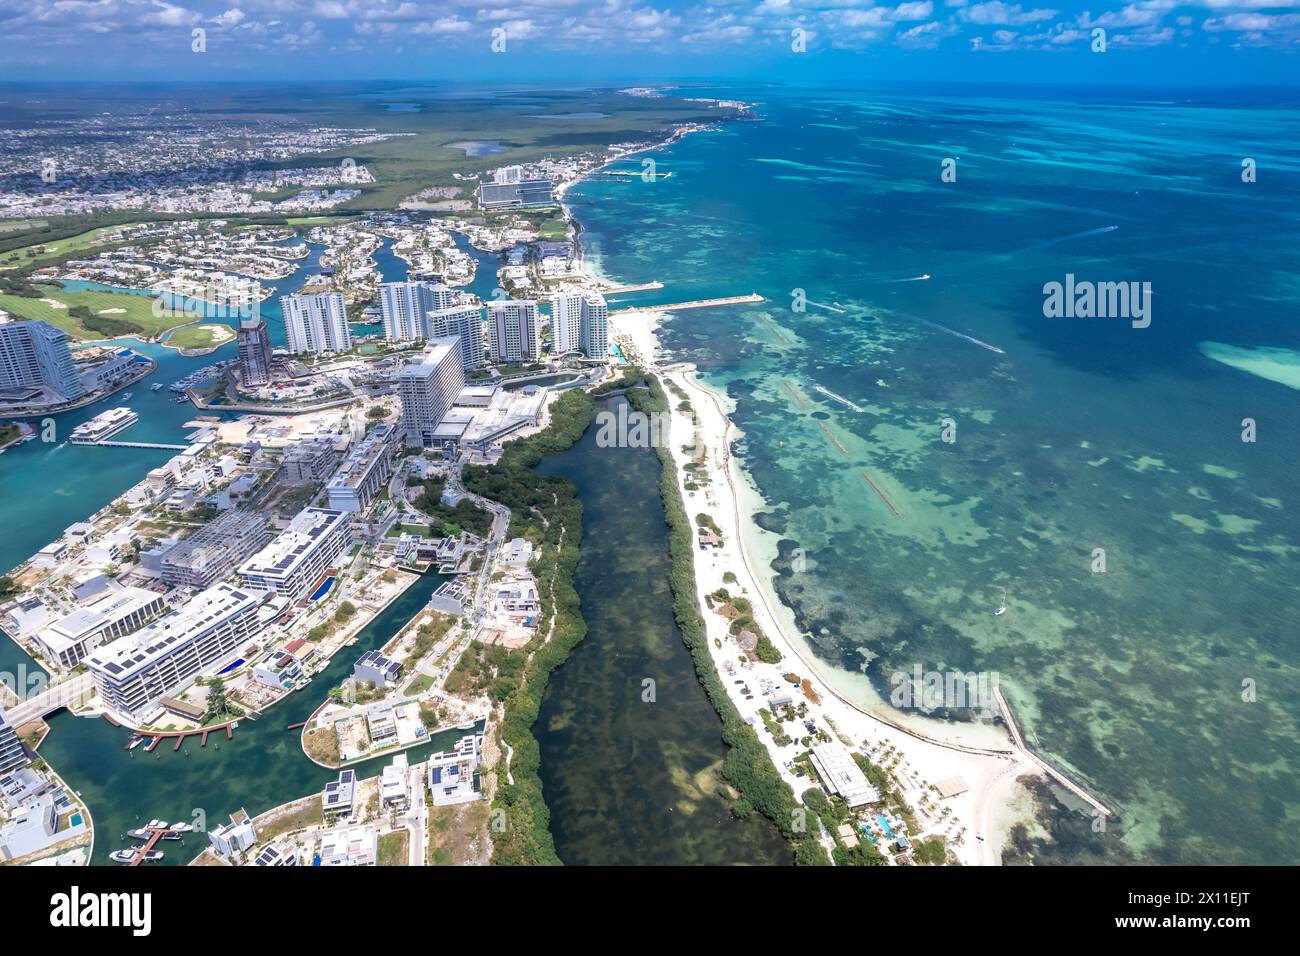 Drone view of Puerto Cancun, Mexico Stock Photo